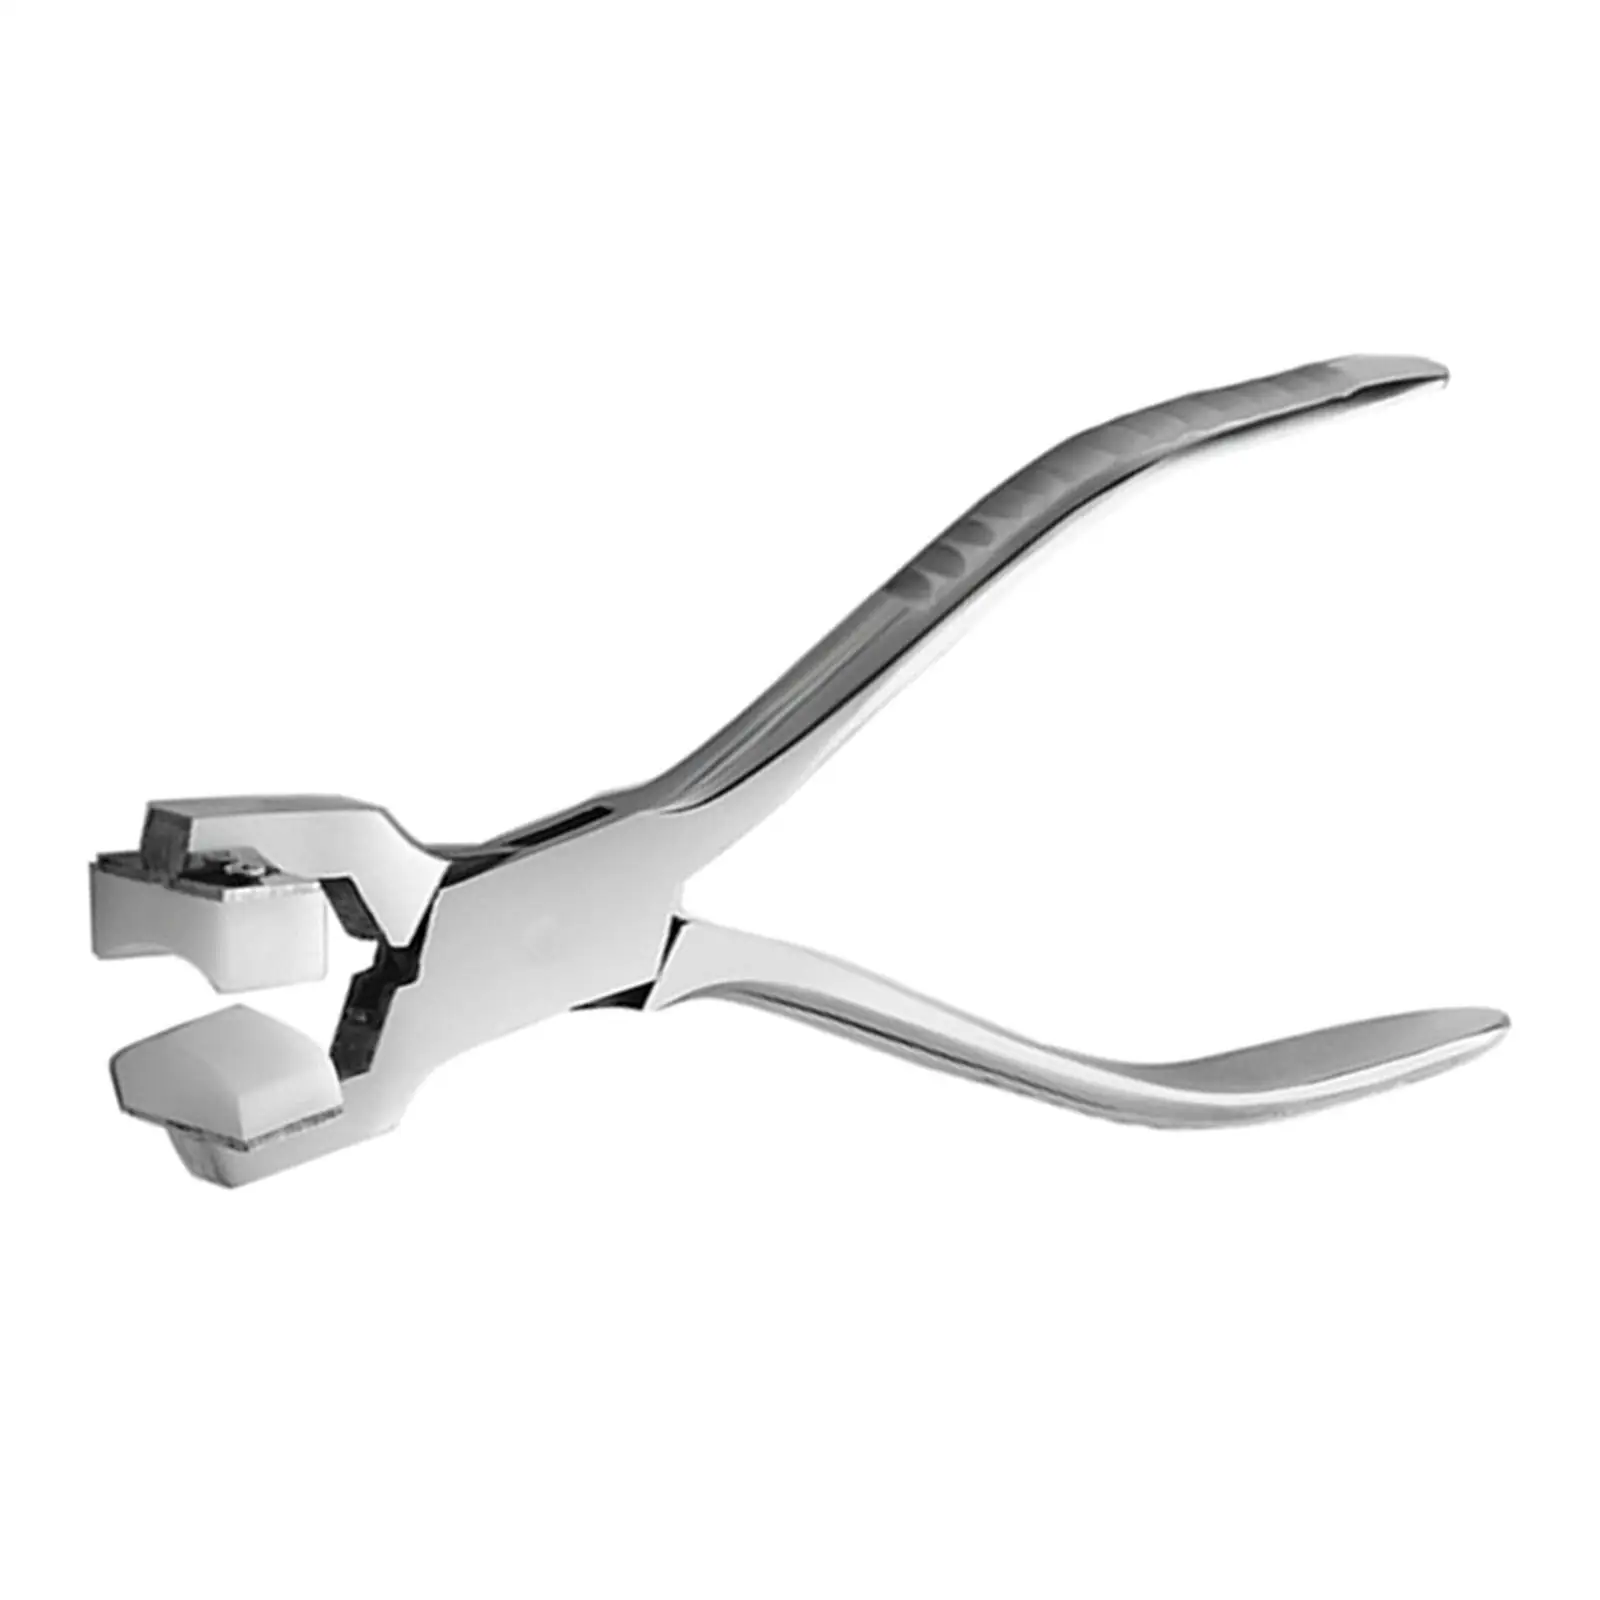 Durable Bracelet Pliers Jewelry Making Tool Ring Curving Craft Professional DIY Bangle Tool Bangles Bending Pliers Accessories